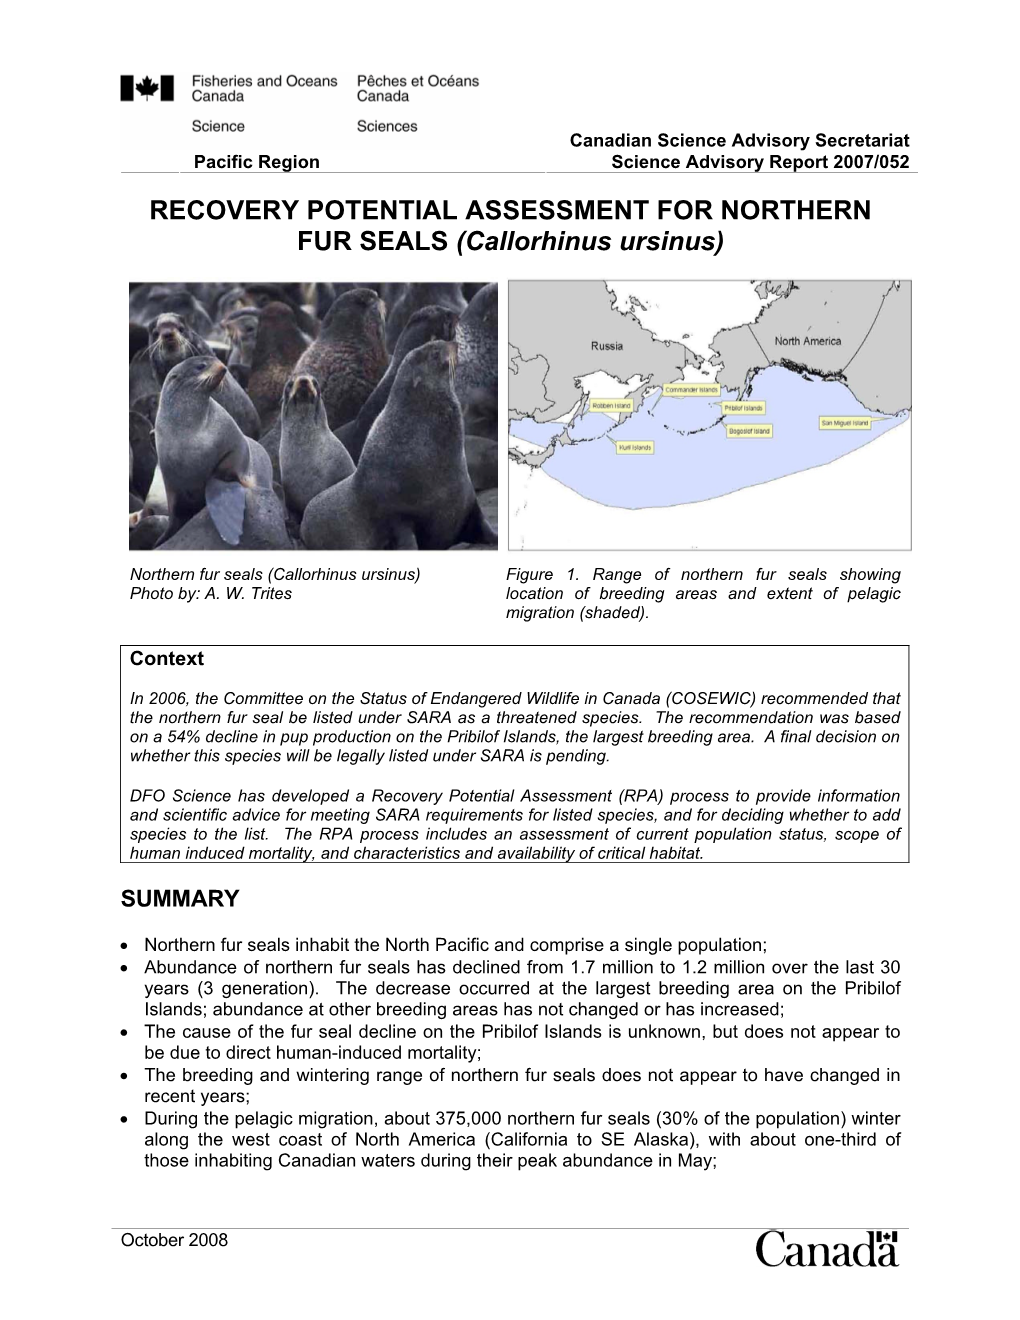 RECOVERY POTENTIAL ASSESSMENT for NORTHERN FUR SEALS (Callorhinus Ursinus)